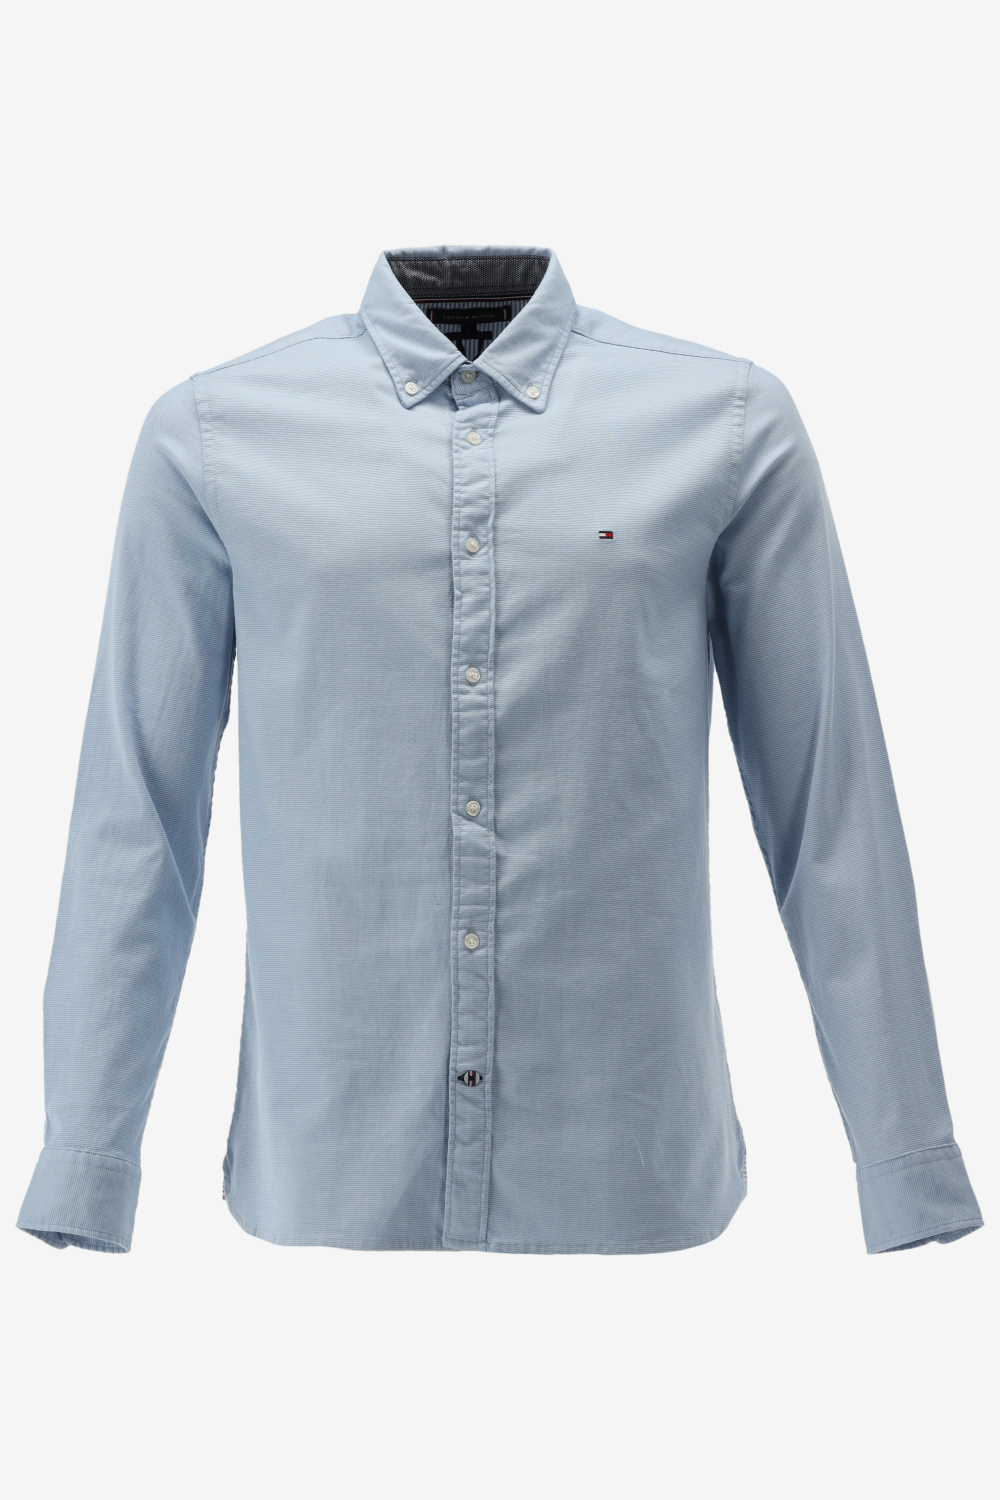 Tommy Hilfiger Casual Shirt 